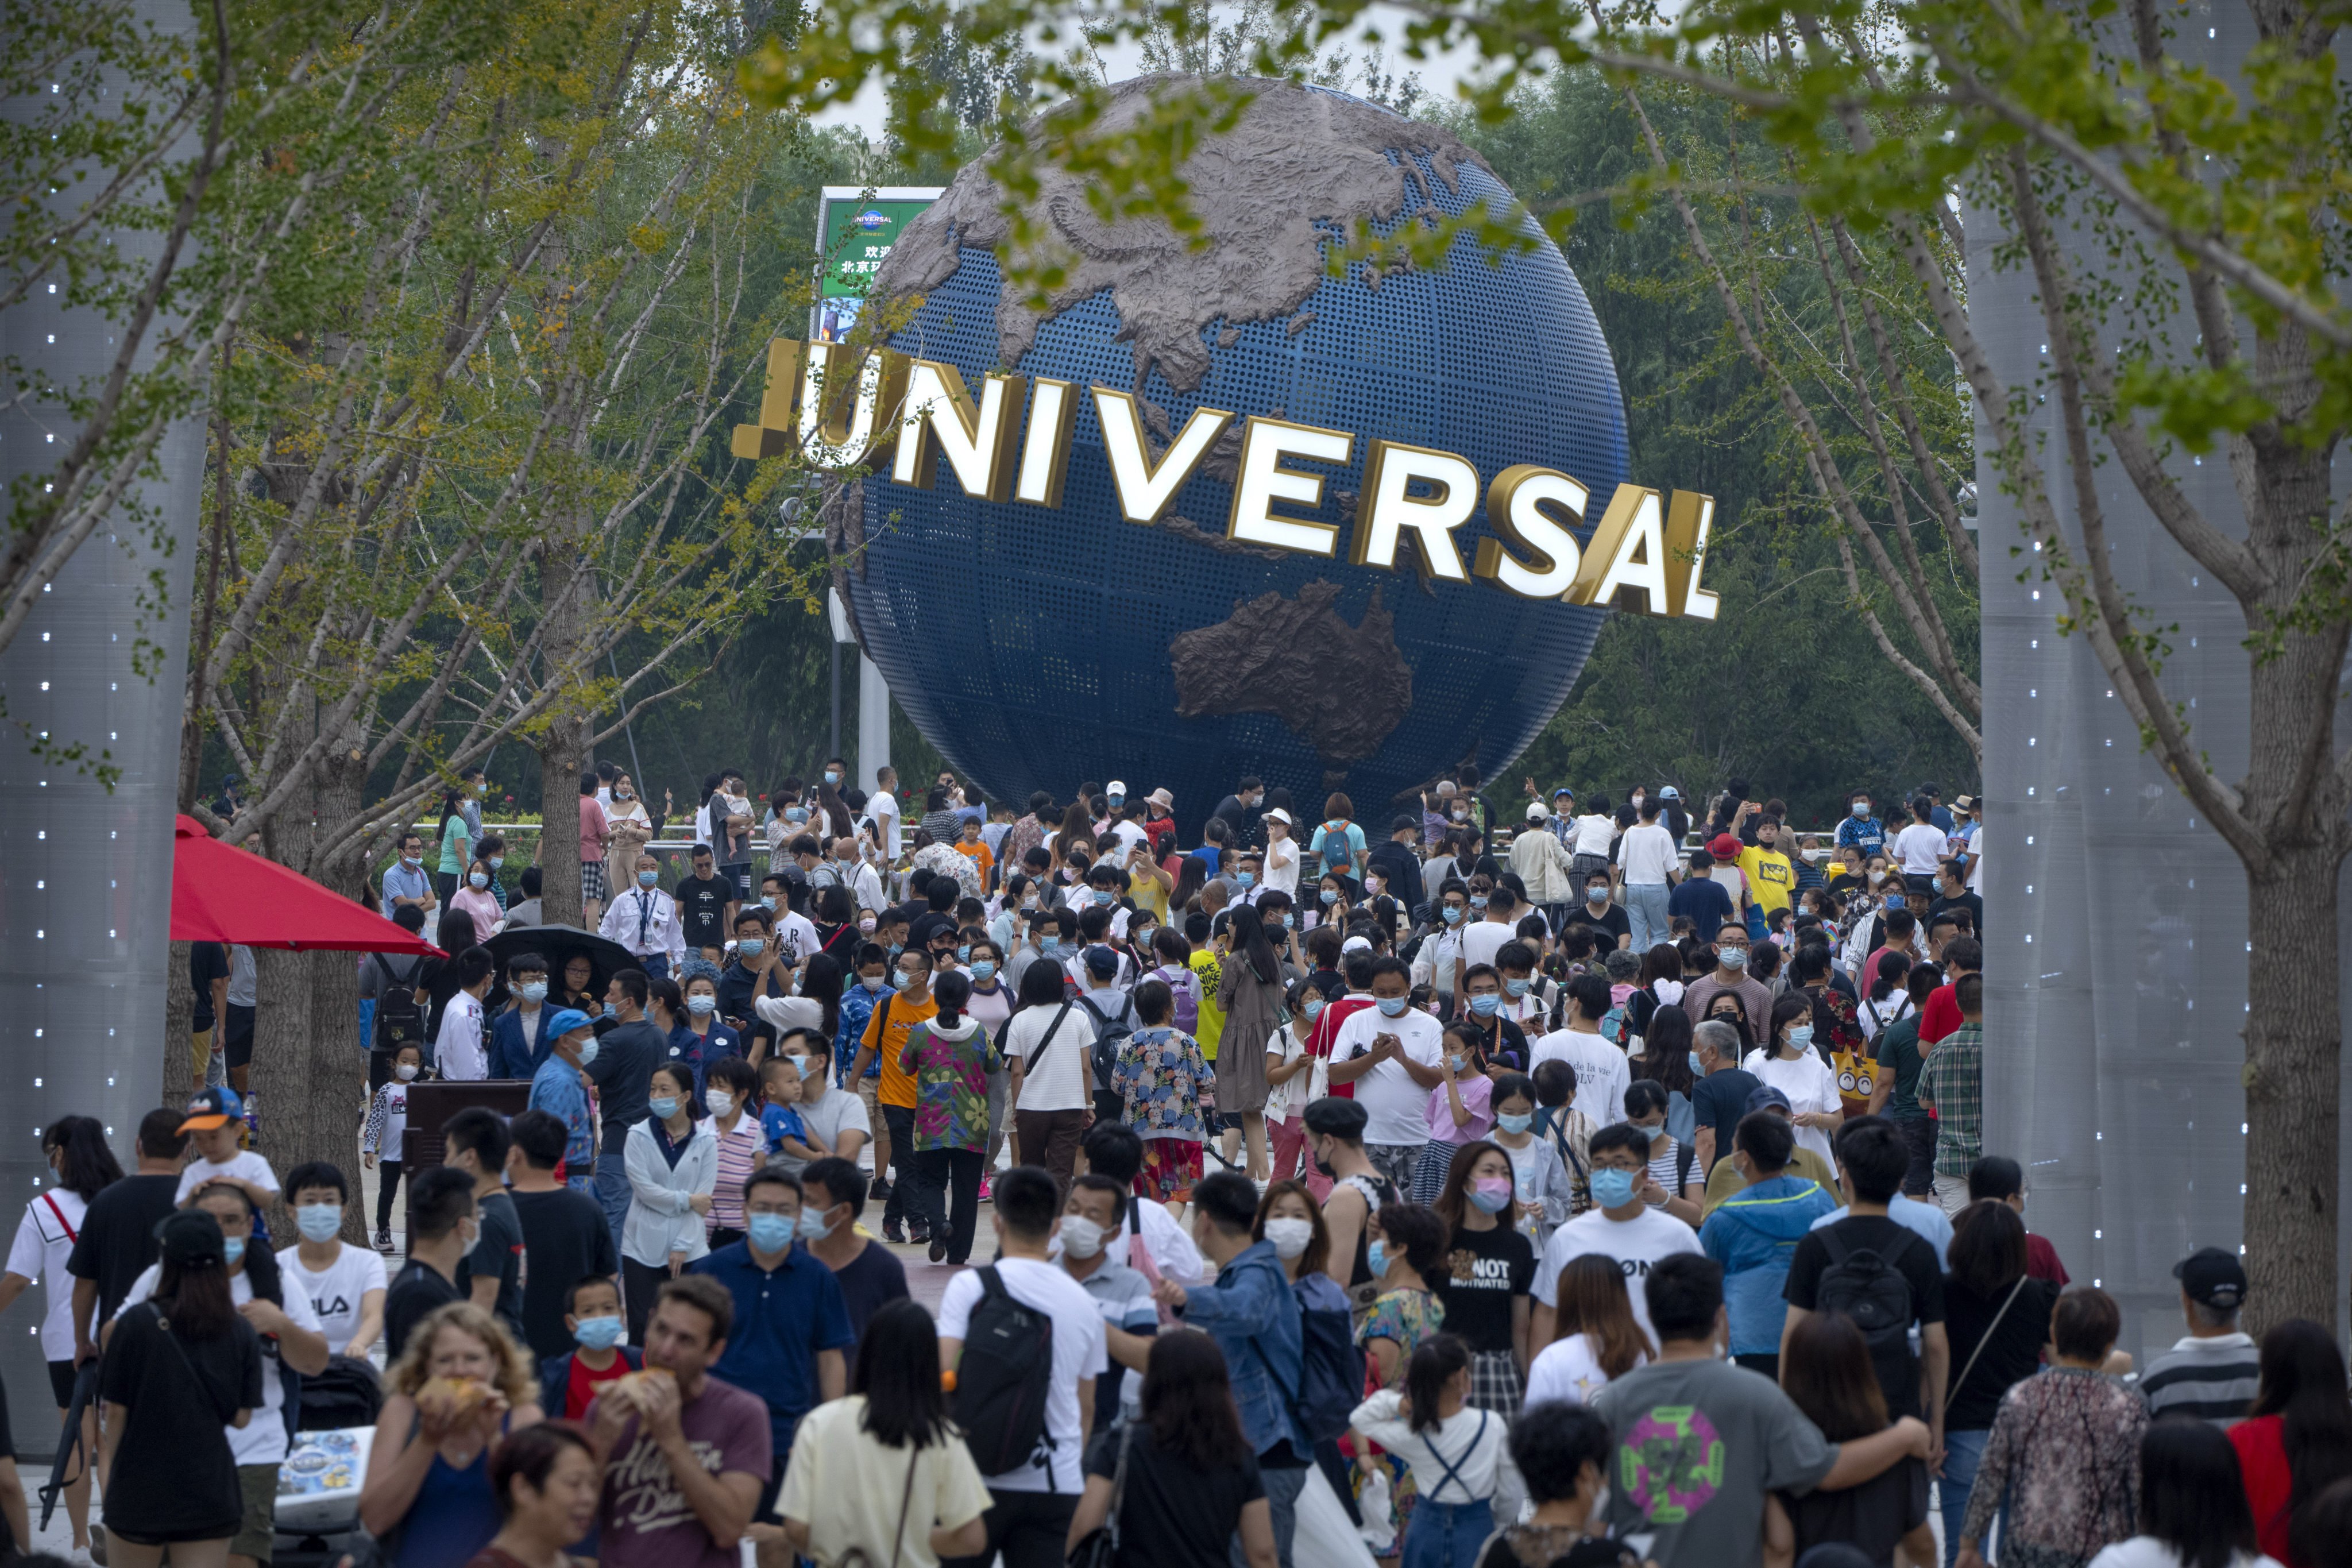 Crowds flock to Universal Studios Beijing after its soft opening. The opening of the theme park is the latest symbol of the interconnectedness between China and the US. Photo: AP 